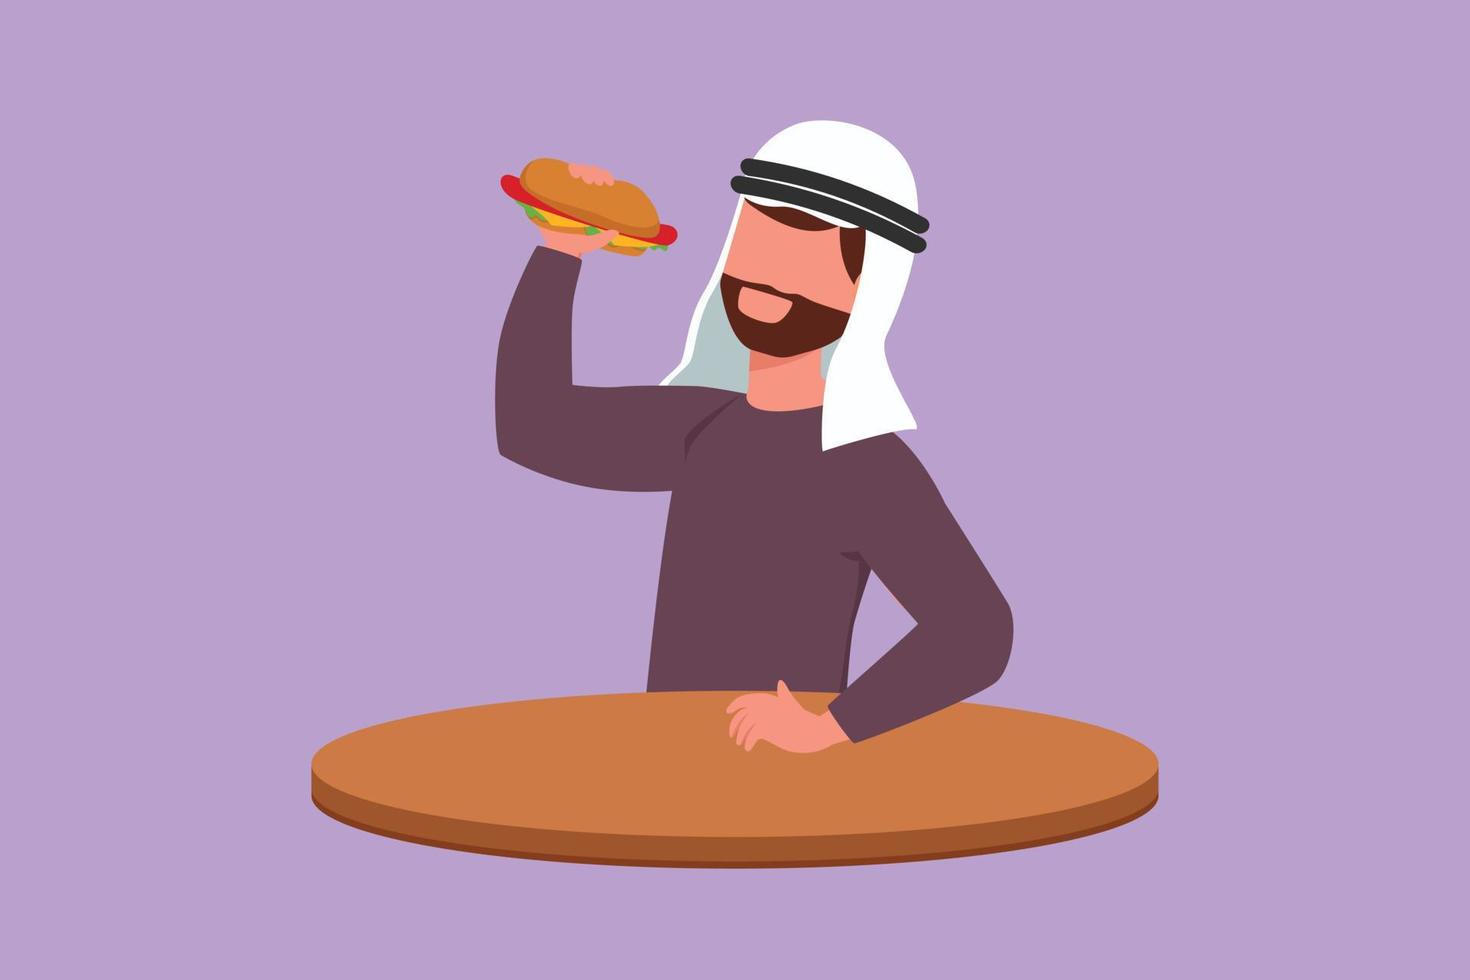 Cartoon flat style drawing happy bearded Arabian man eating hotdog sandwich. Tasty street fast food. For cafe, eatery, ads. Unhealthy snack meal. Office lunch break. Graphic design vector illustration